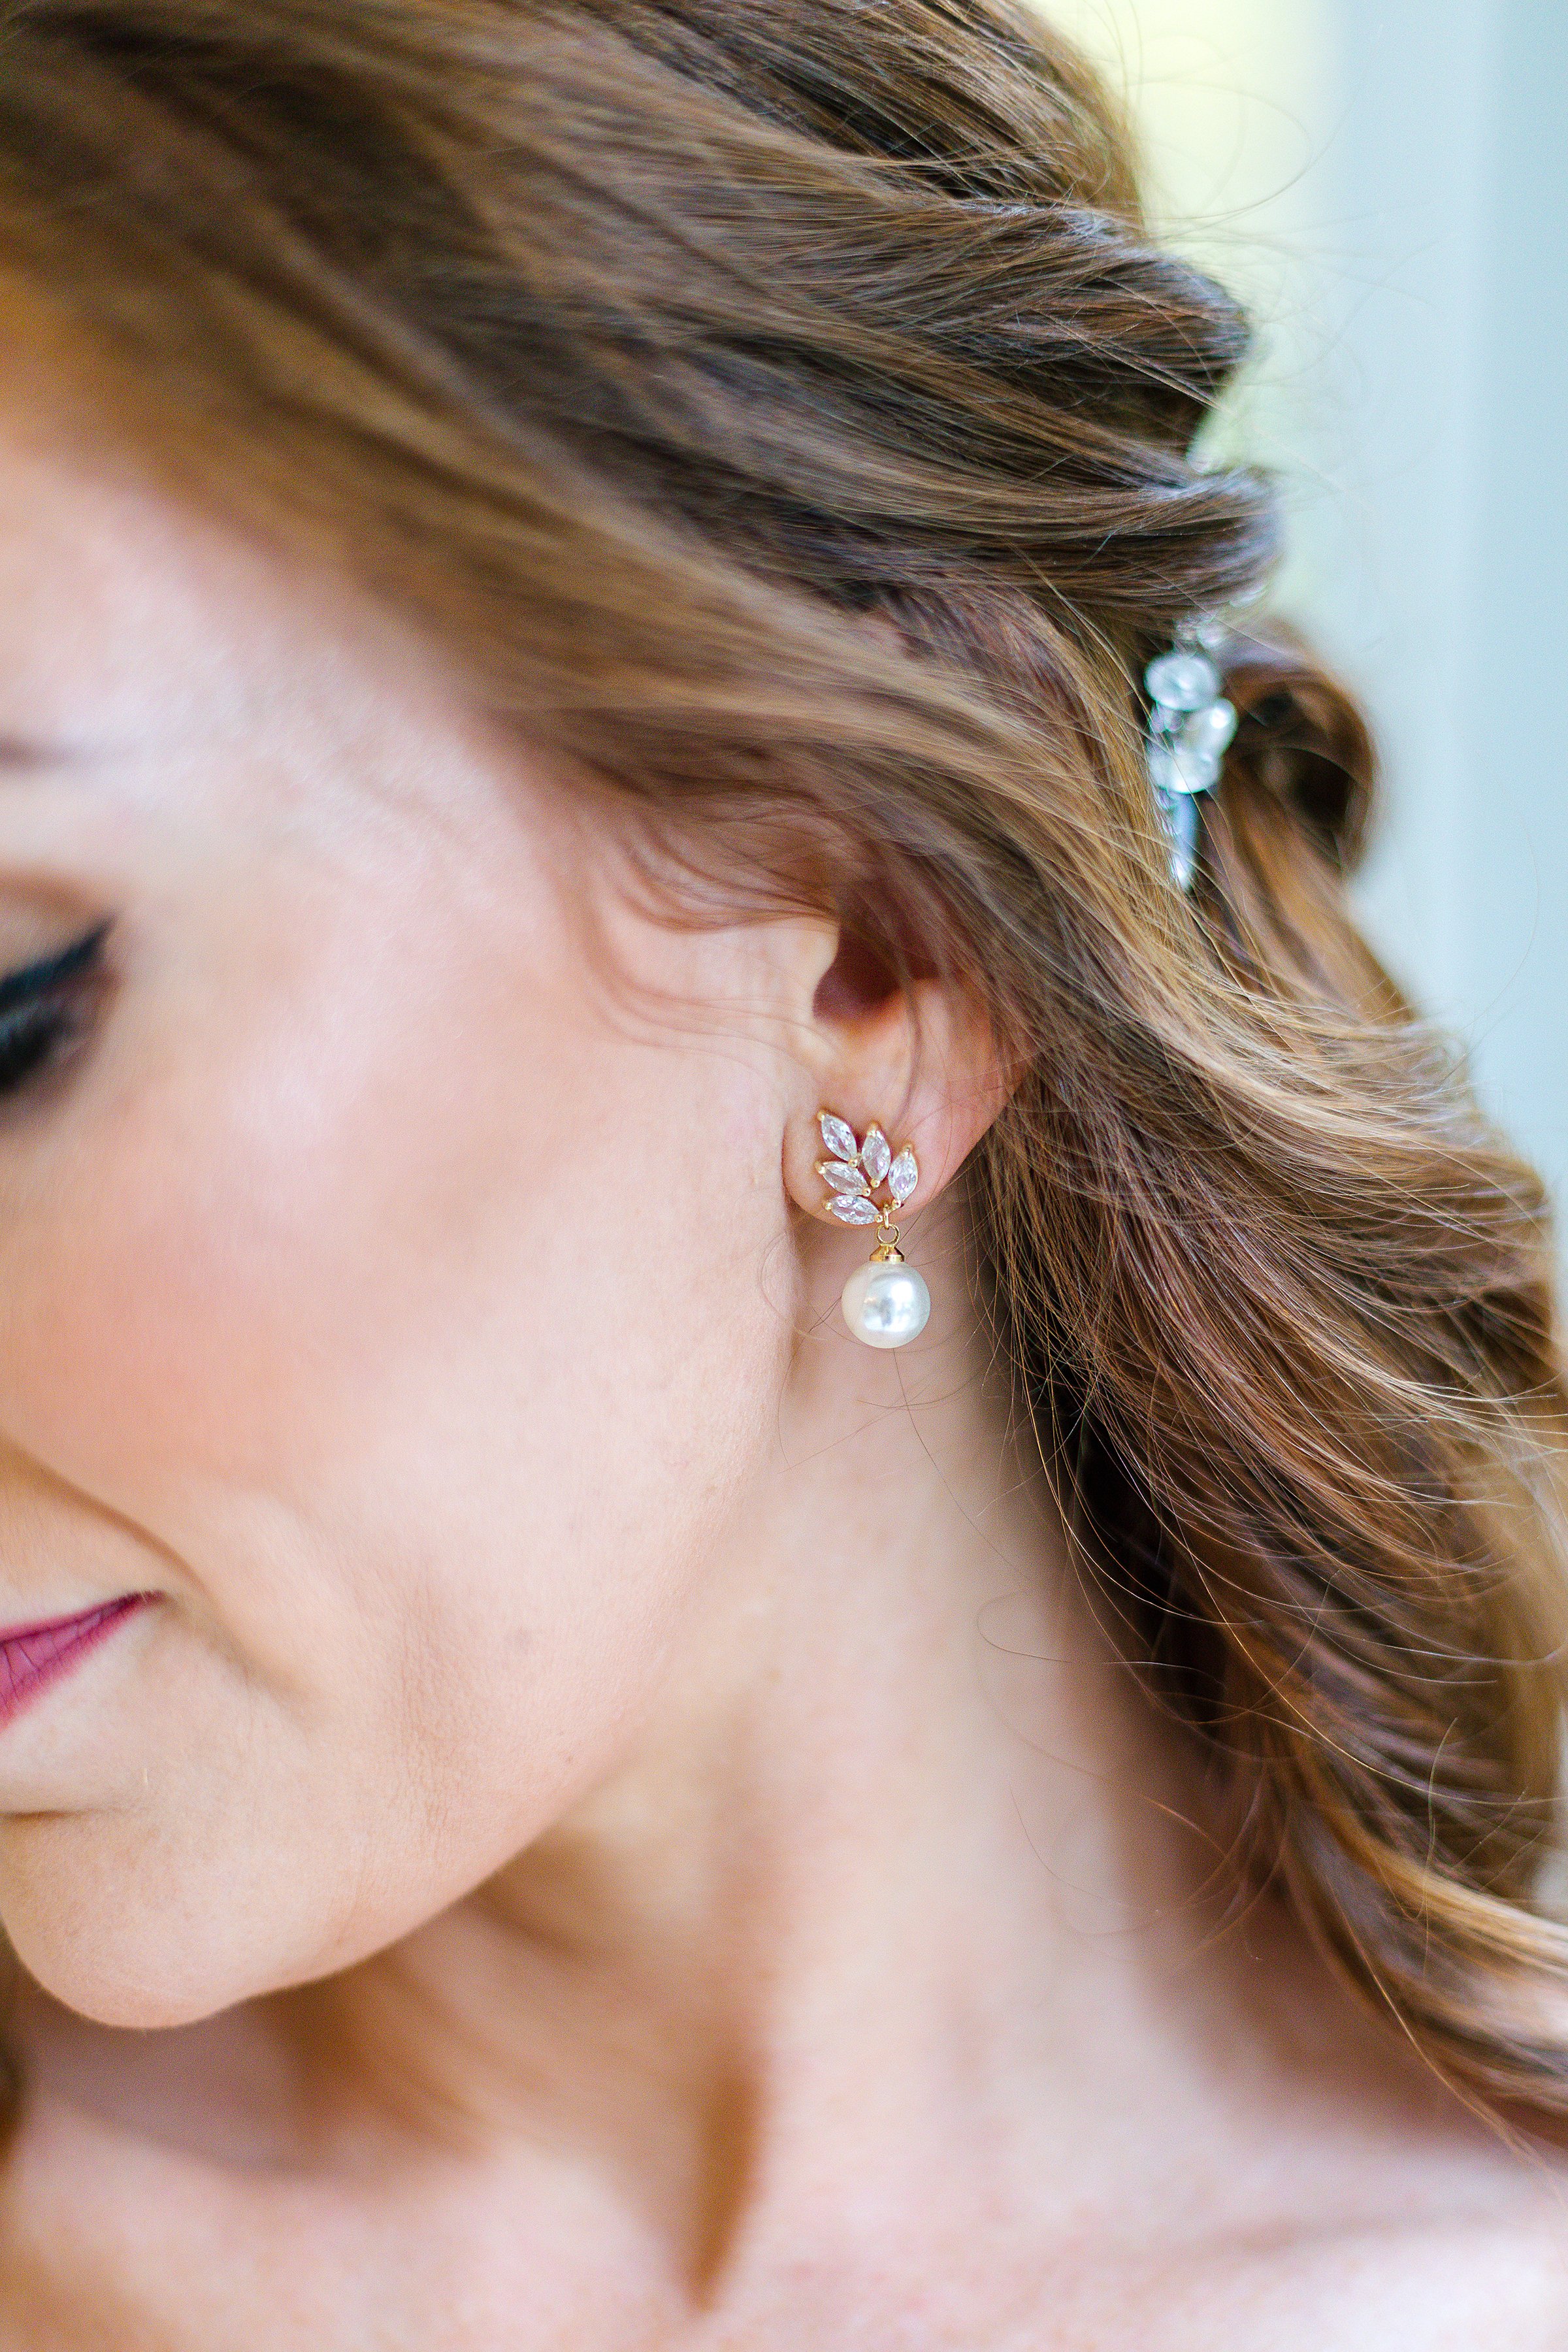 Earring details on wedding day